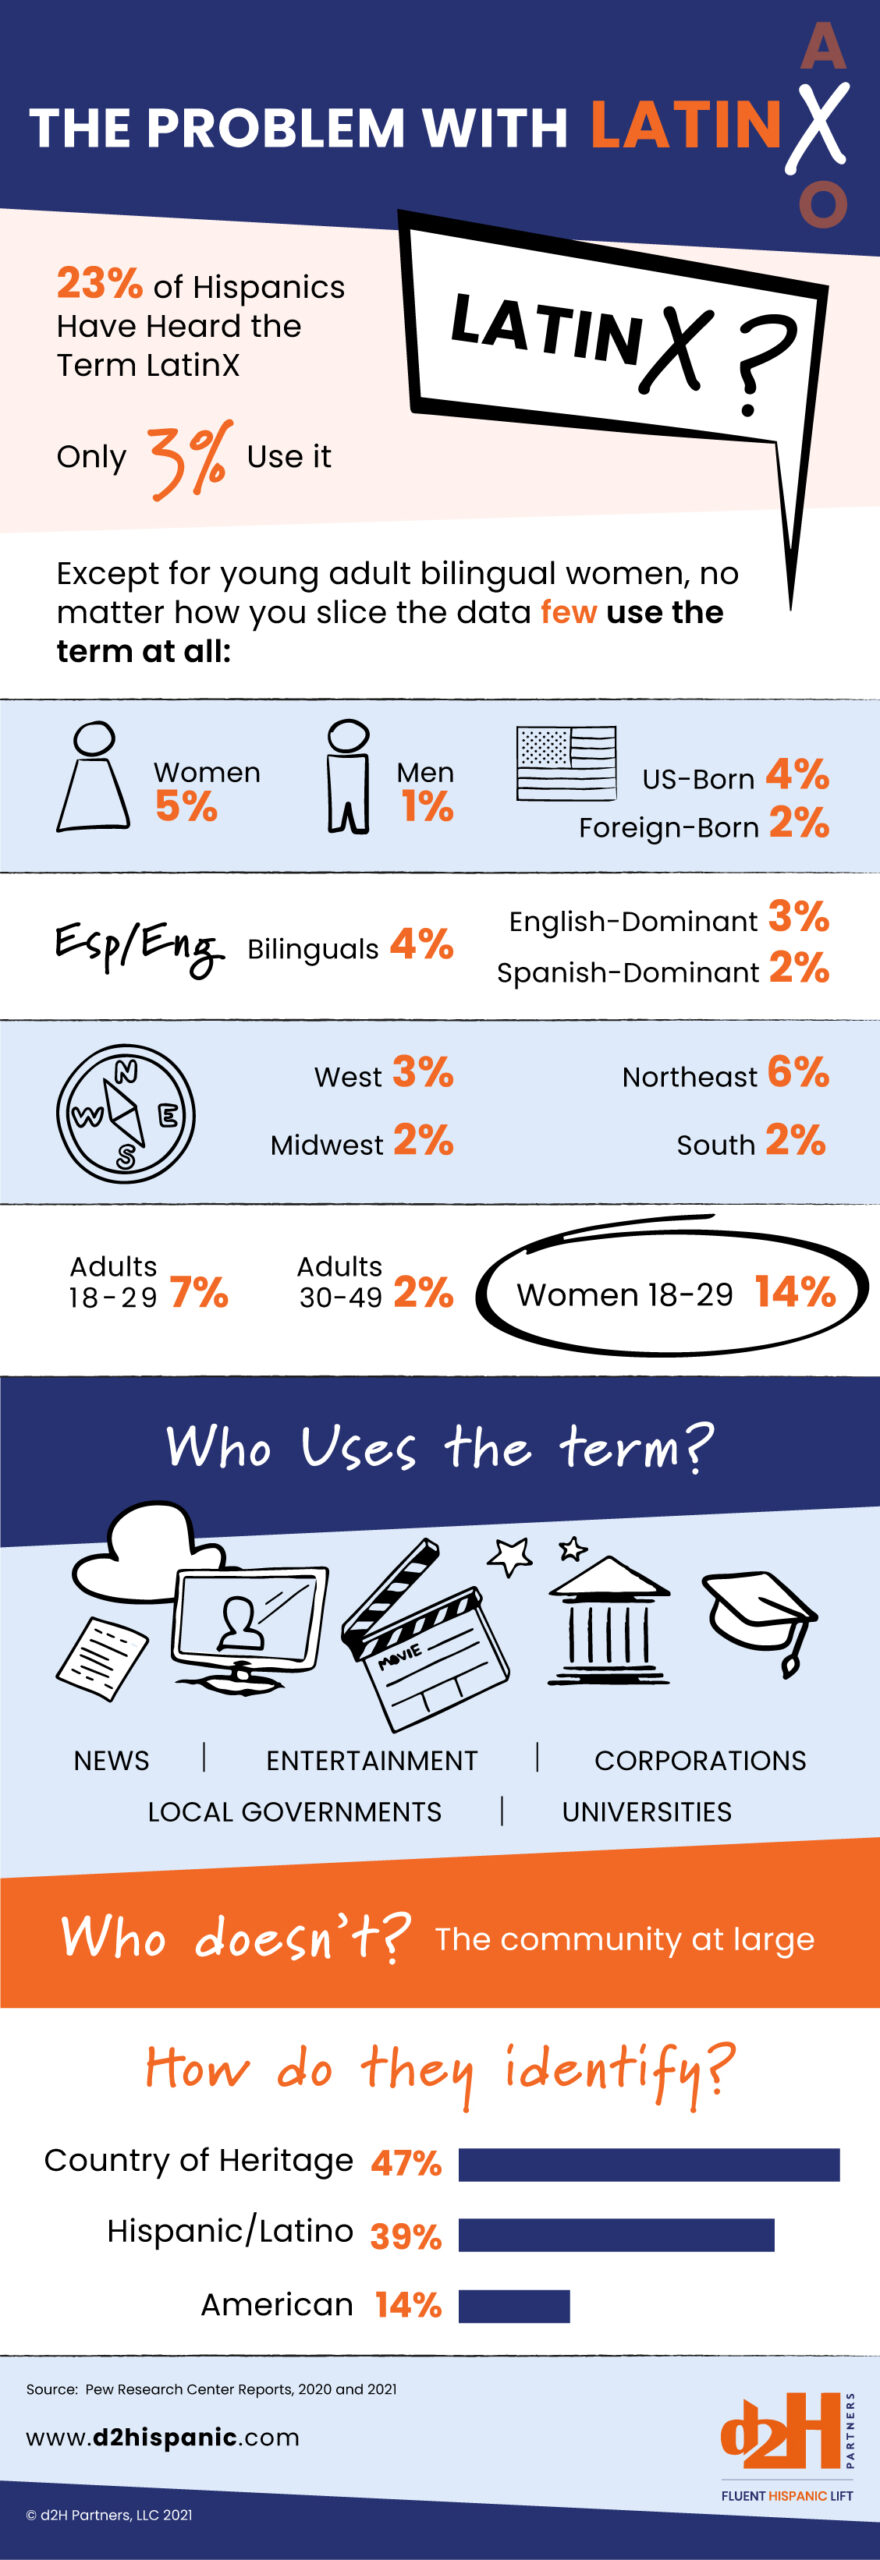 The Problem with LatinX - Infographic